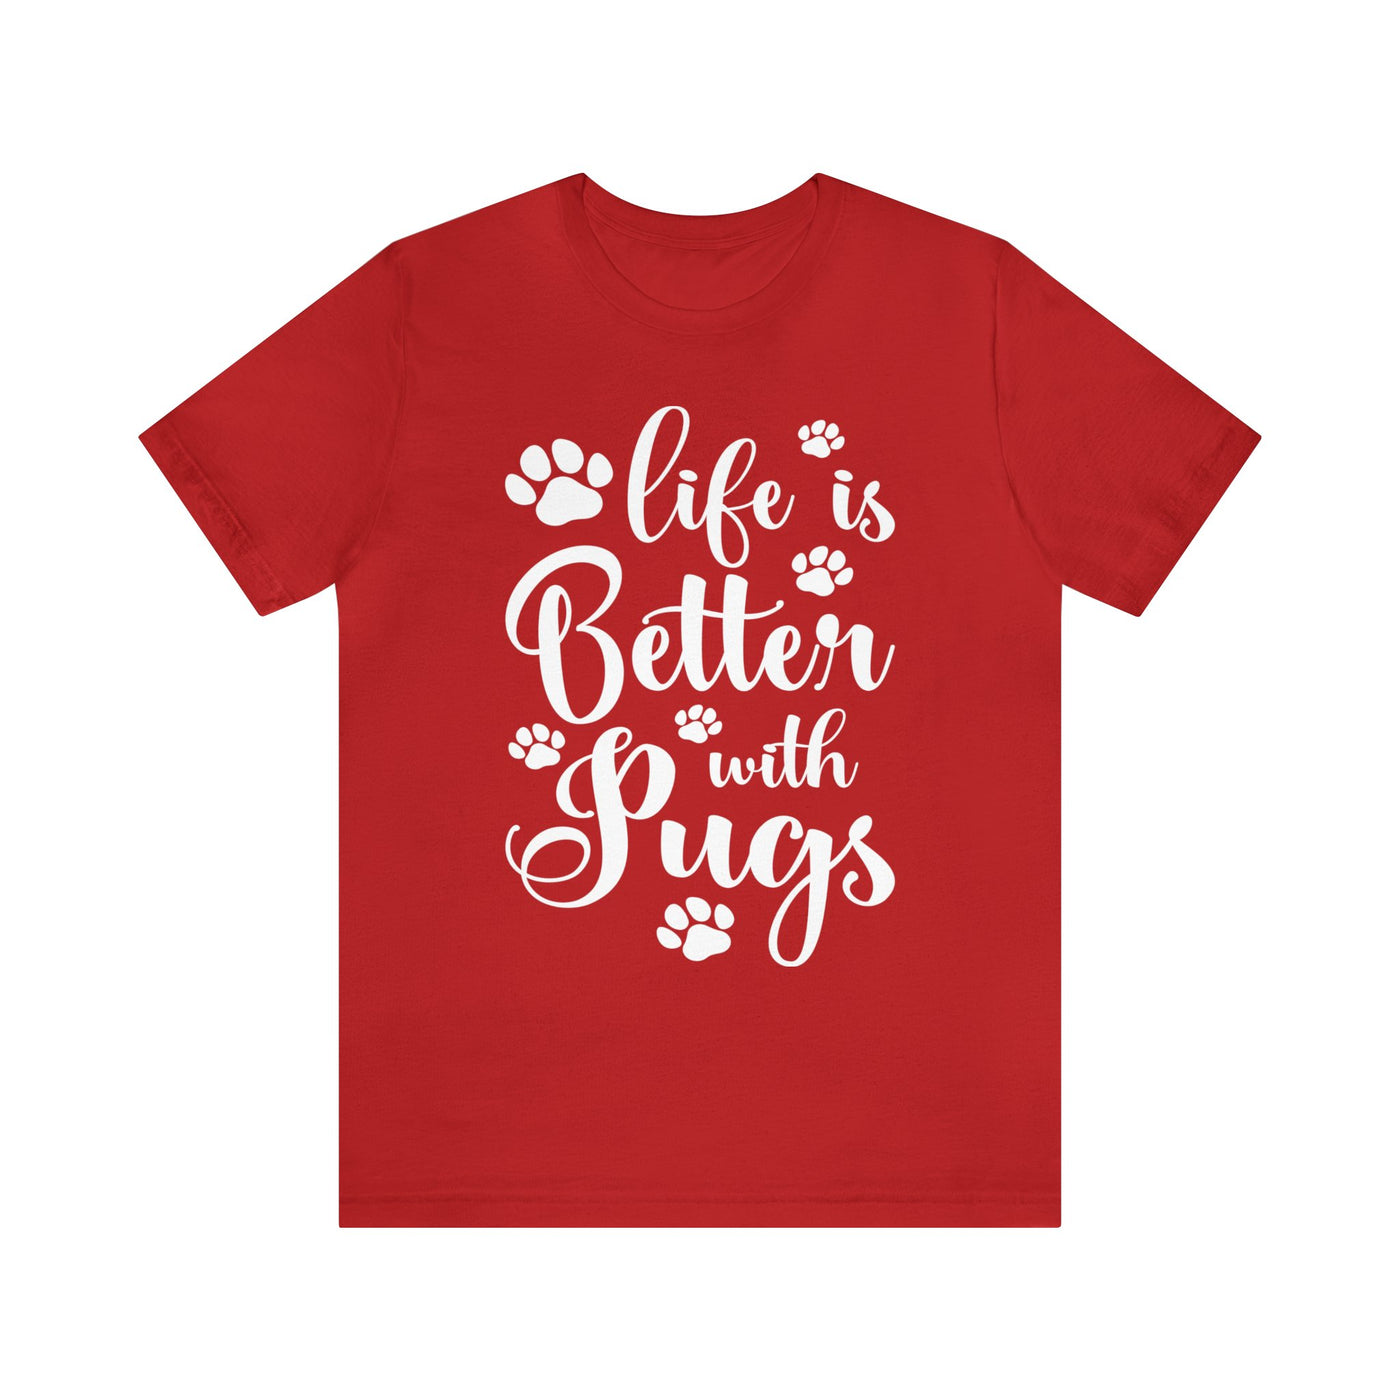 Life Is Better With Pugs T-Shirt